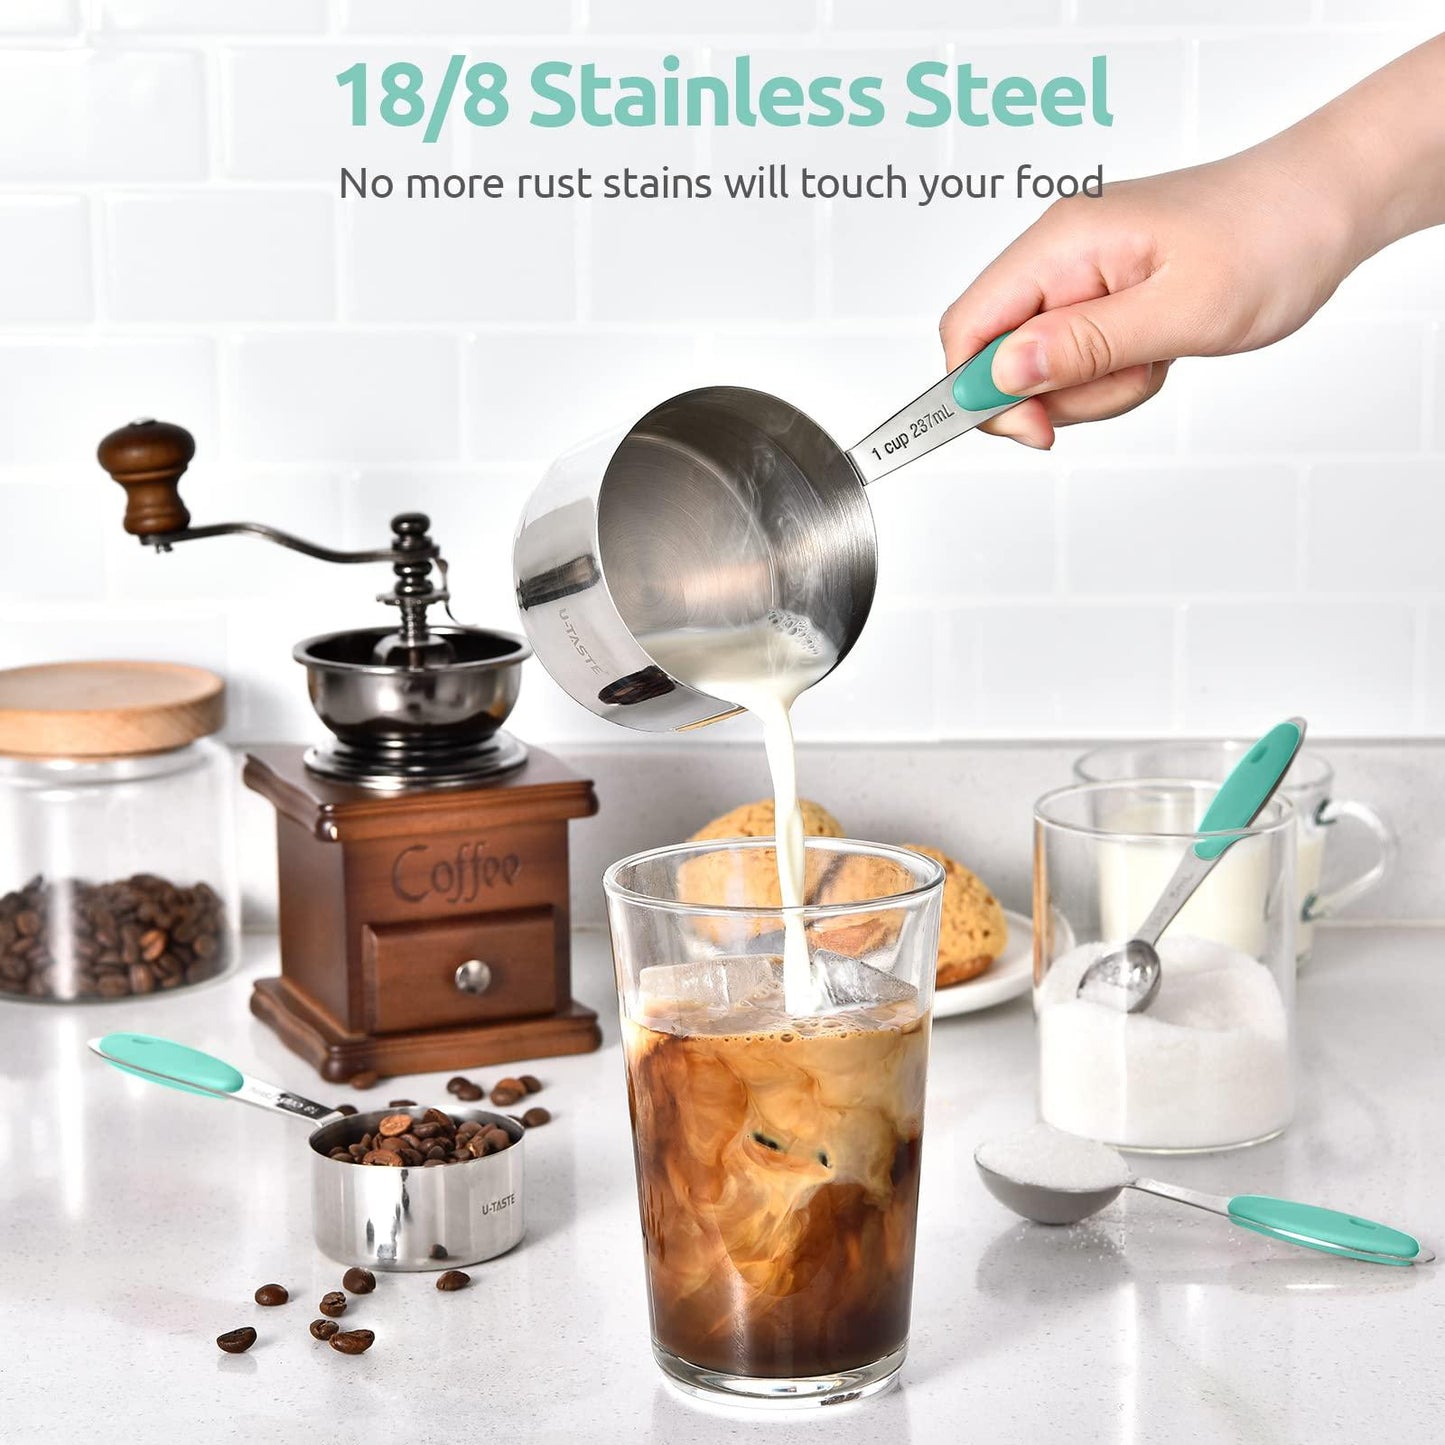 Measuring Cups and Spoons Set: U-Taste 18/8 Stainless Steel 10 Pieces Metal Stacking Kitchen Baking Cooking Food Measure Set 5 Cups 5 Spoons with Strengthened Weld Joints (Aqua Sky, Upgraded Version) - CookCave